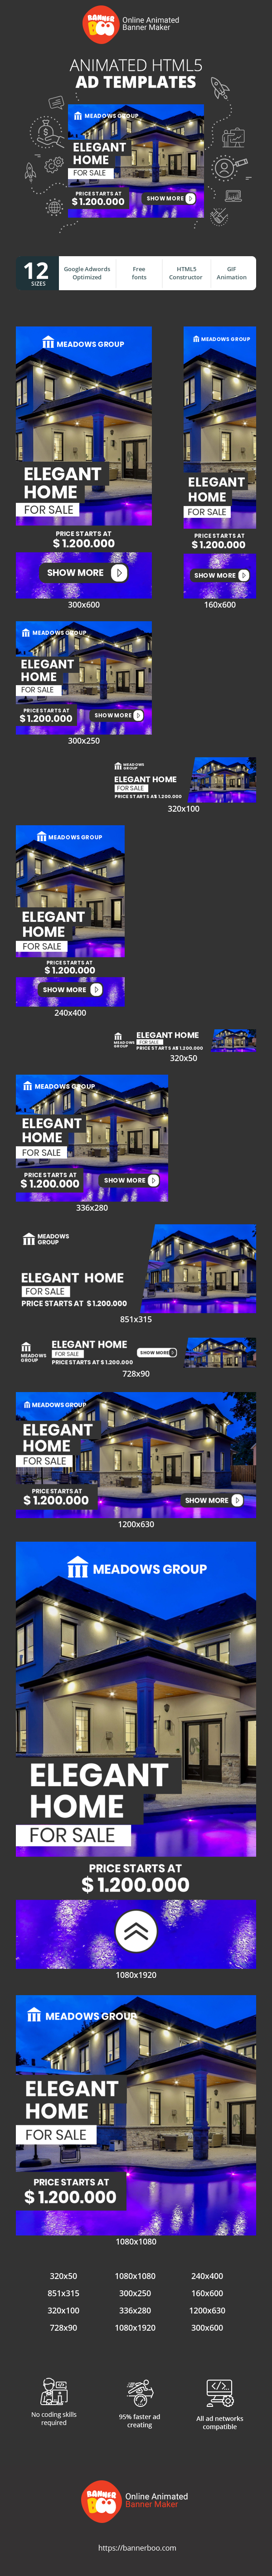 Banner ad template — Elegant Home For Sale — Price Starts At $ 1,200,000